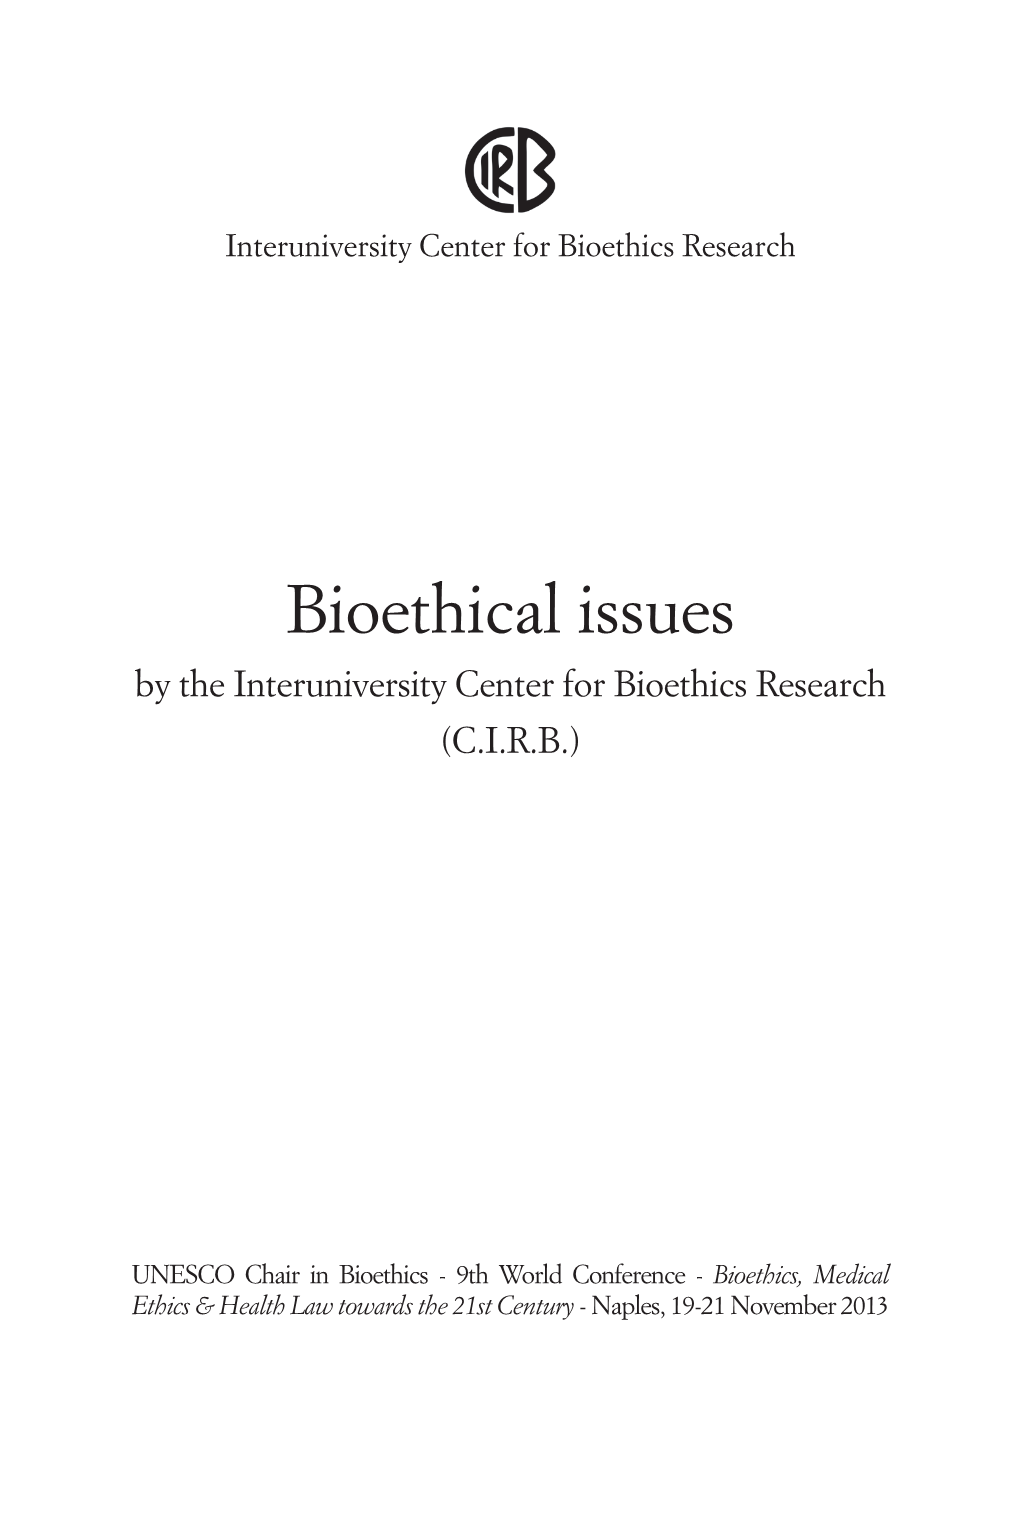 Bioethical Issues by the Interuniversity Center for Bioethics Research (C.I.R.B.)